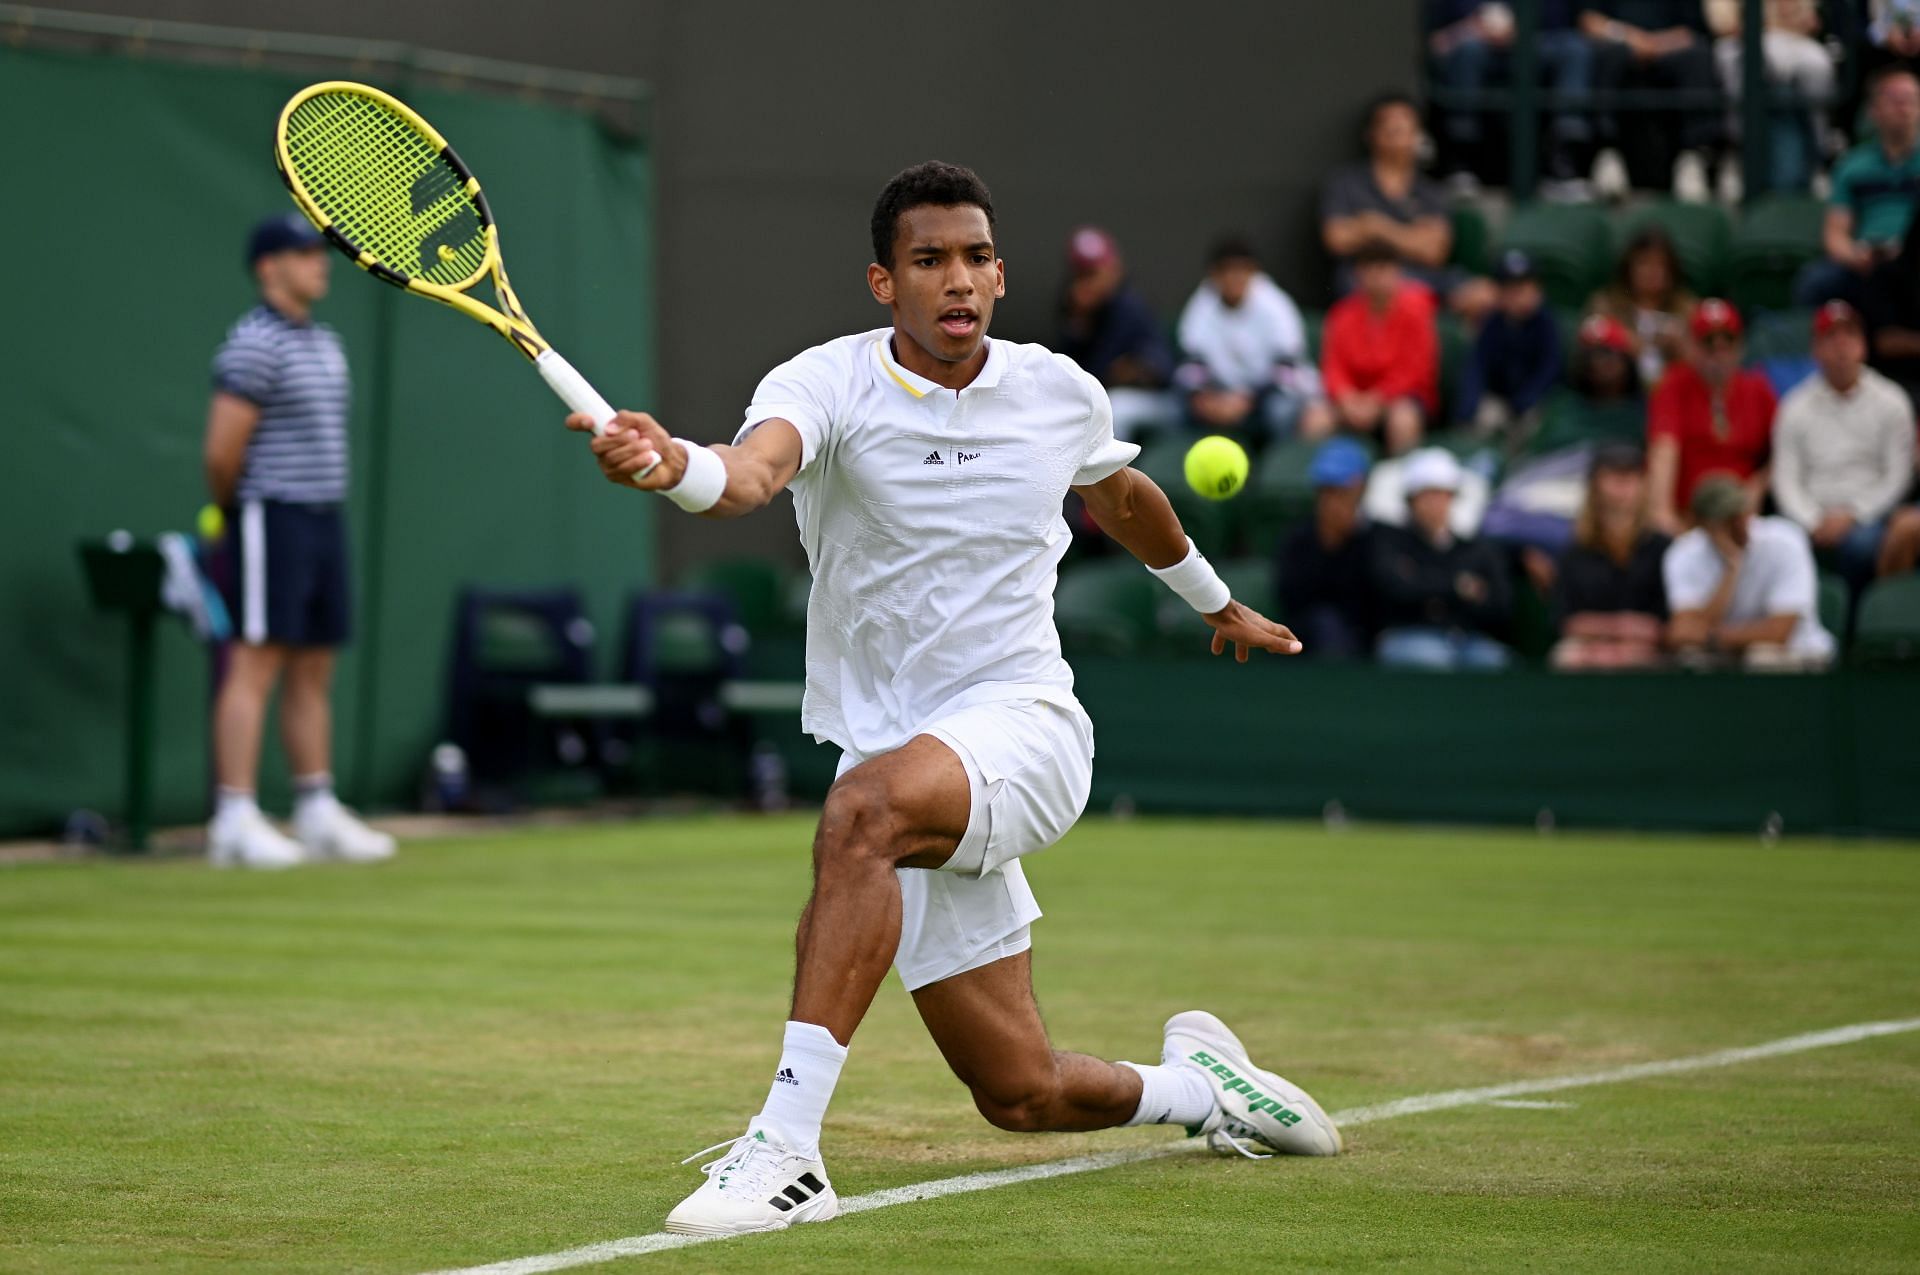 Felix Auger-Aliassime faced an early exit at Wimbledon.